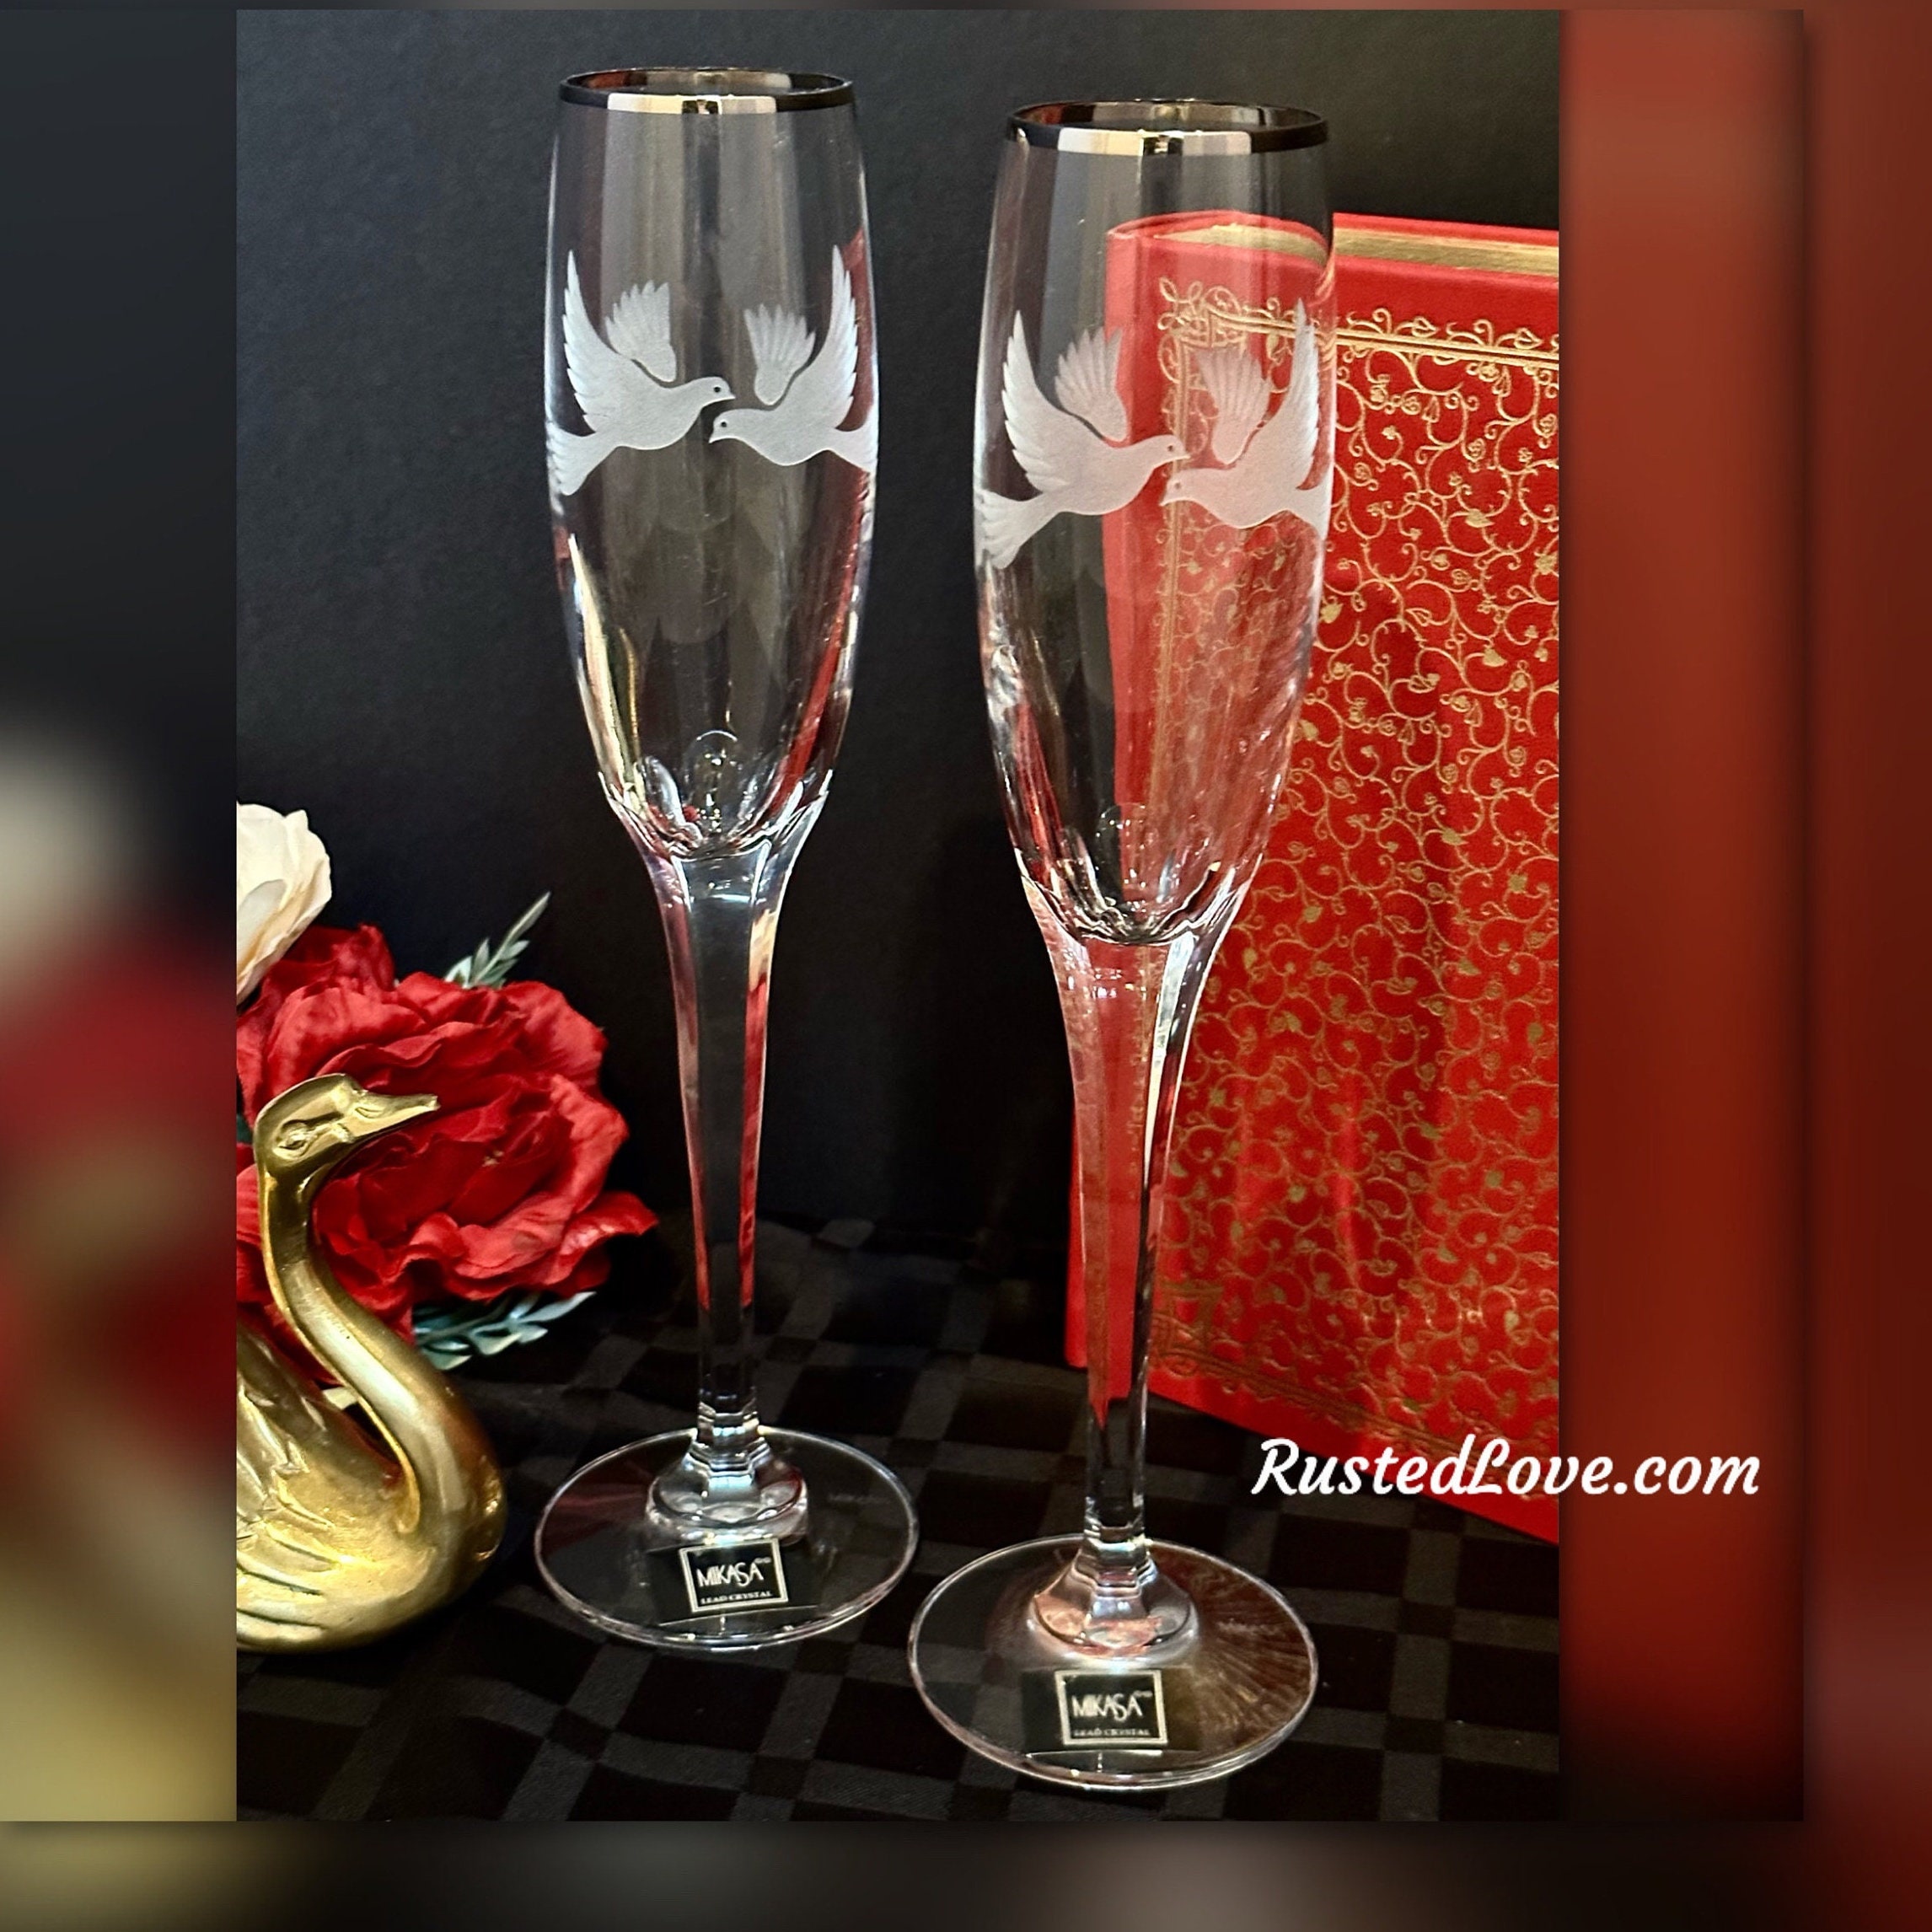 Mikasa Crystal Champagne Flutes / Mikasa Toasting Glasses / Etched Love  Birds / Toasting Wedding Champagne Flutes / Etched Doves / Pair 